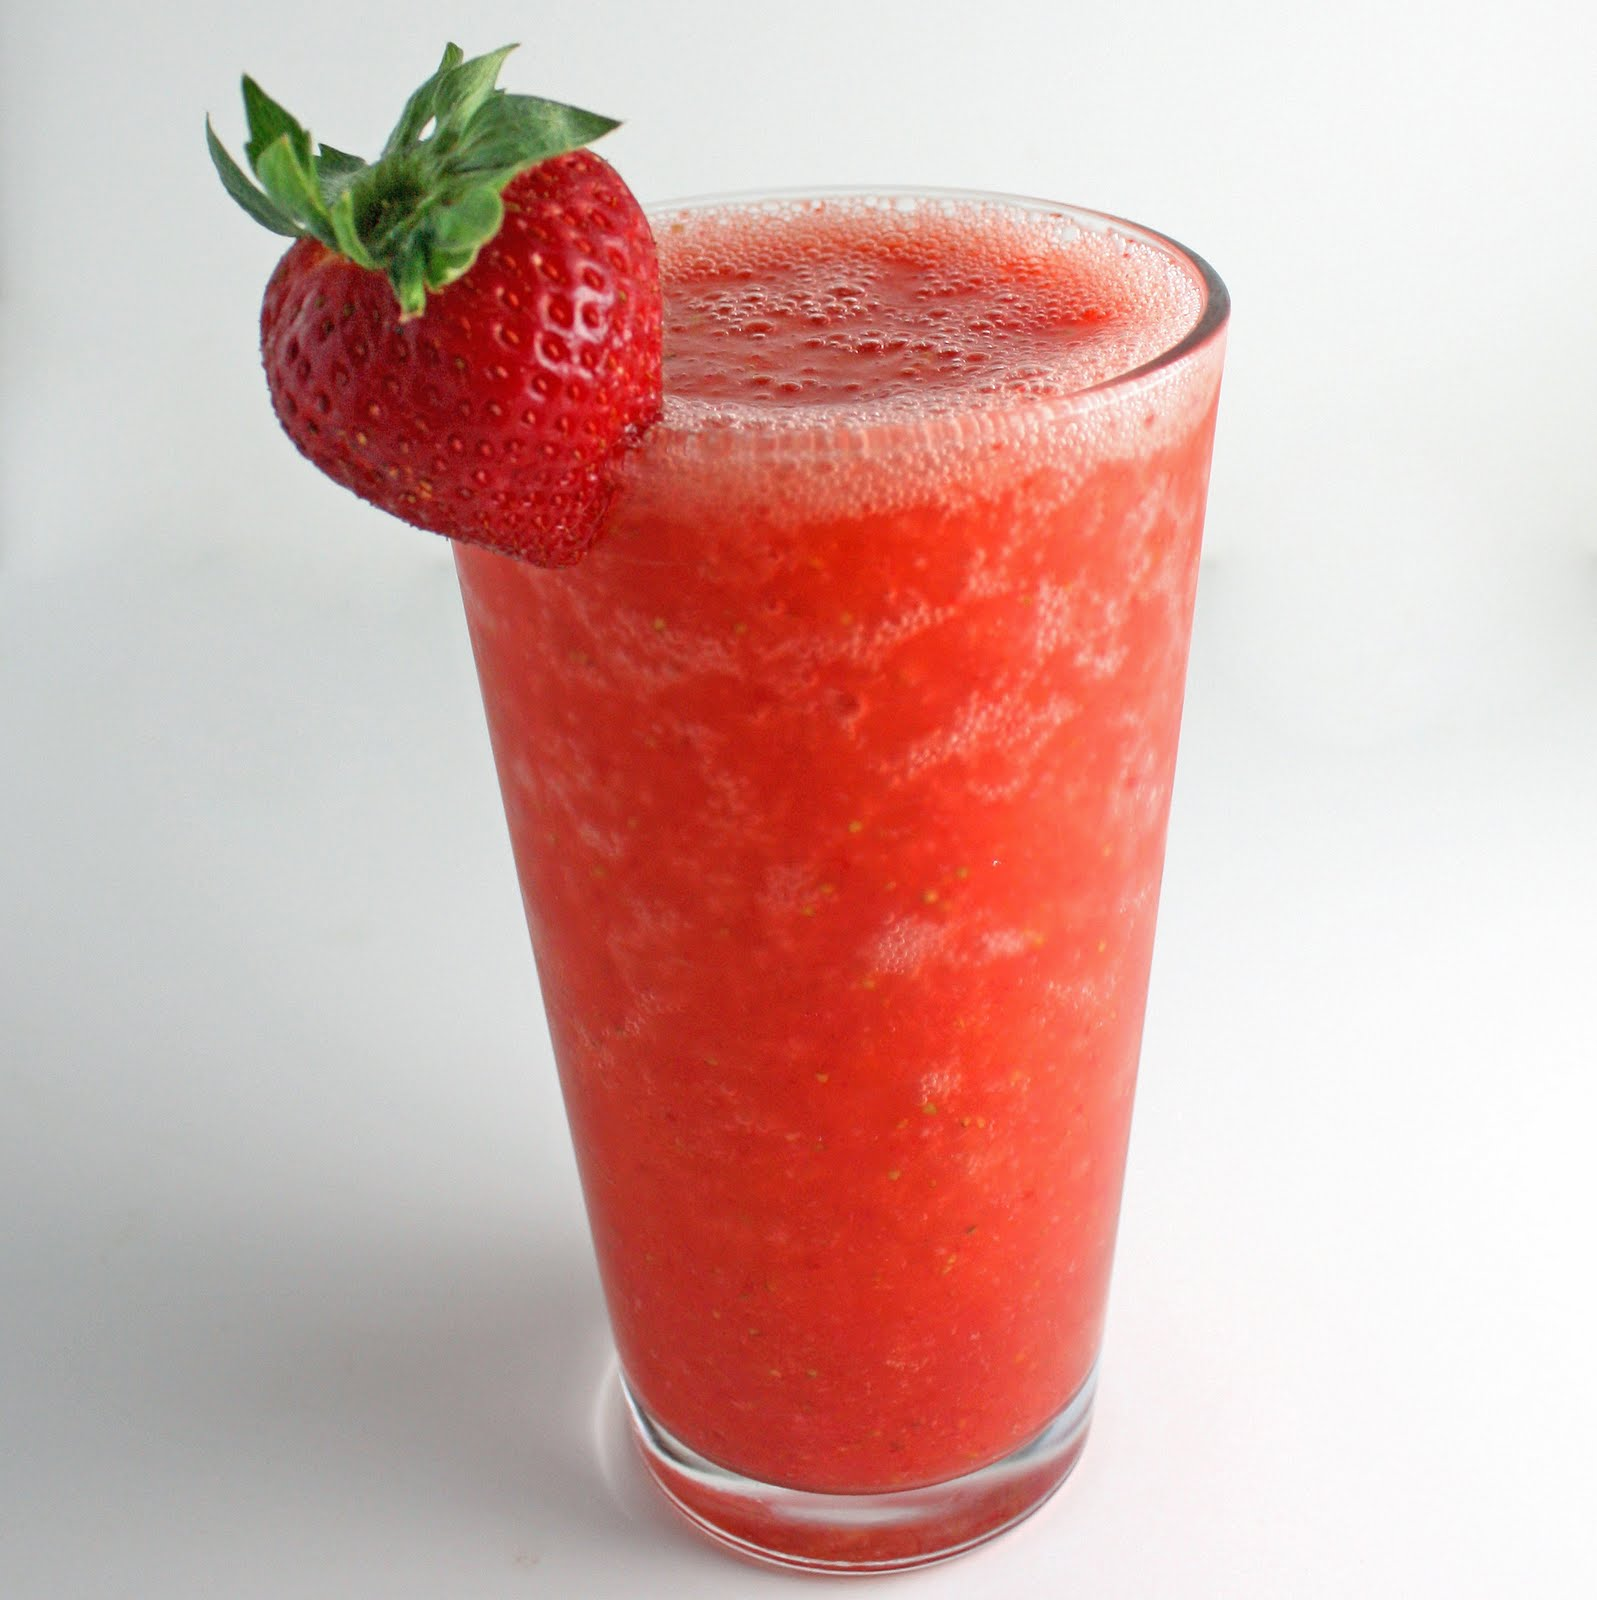 Brewing Strawberry Juice: A Step-by-Step Guide From Nias City